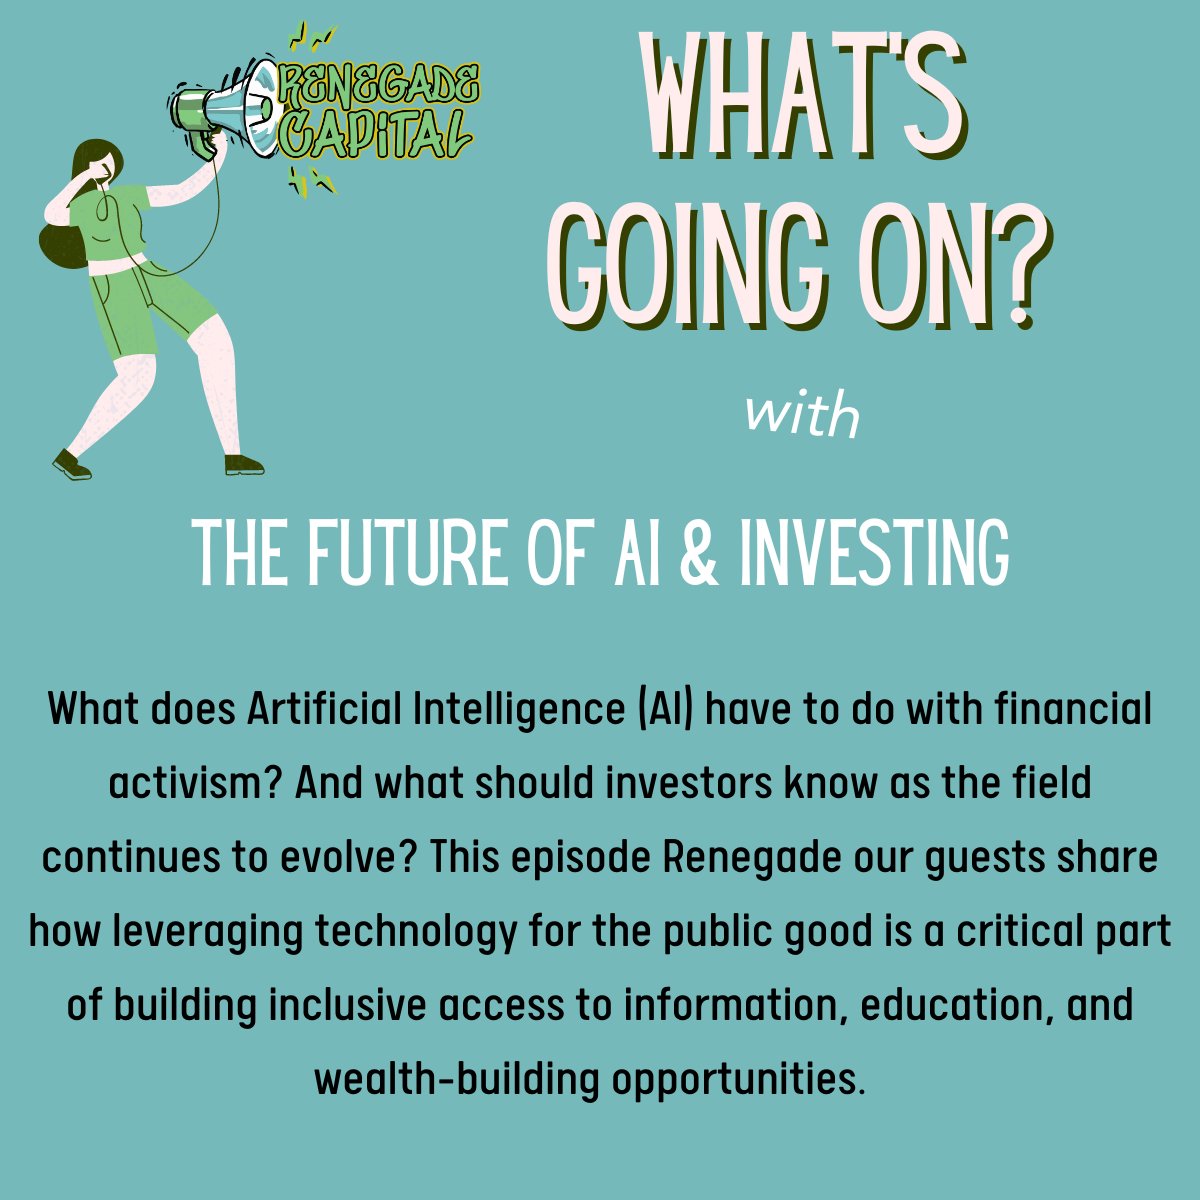 What does Artificial Intelligence (AI) have to do with financial activism? And what should investors know as the field continues to evolve? Check out our new episode to hear more! ow.ly/Q6Gt50Qy8ca